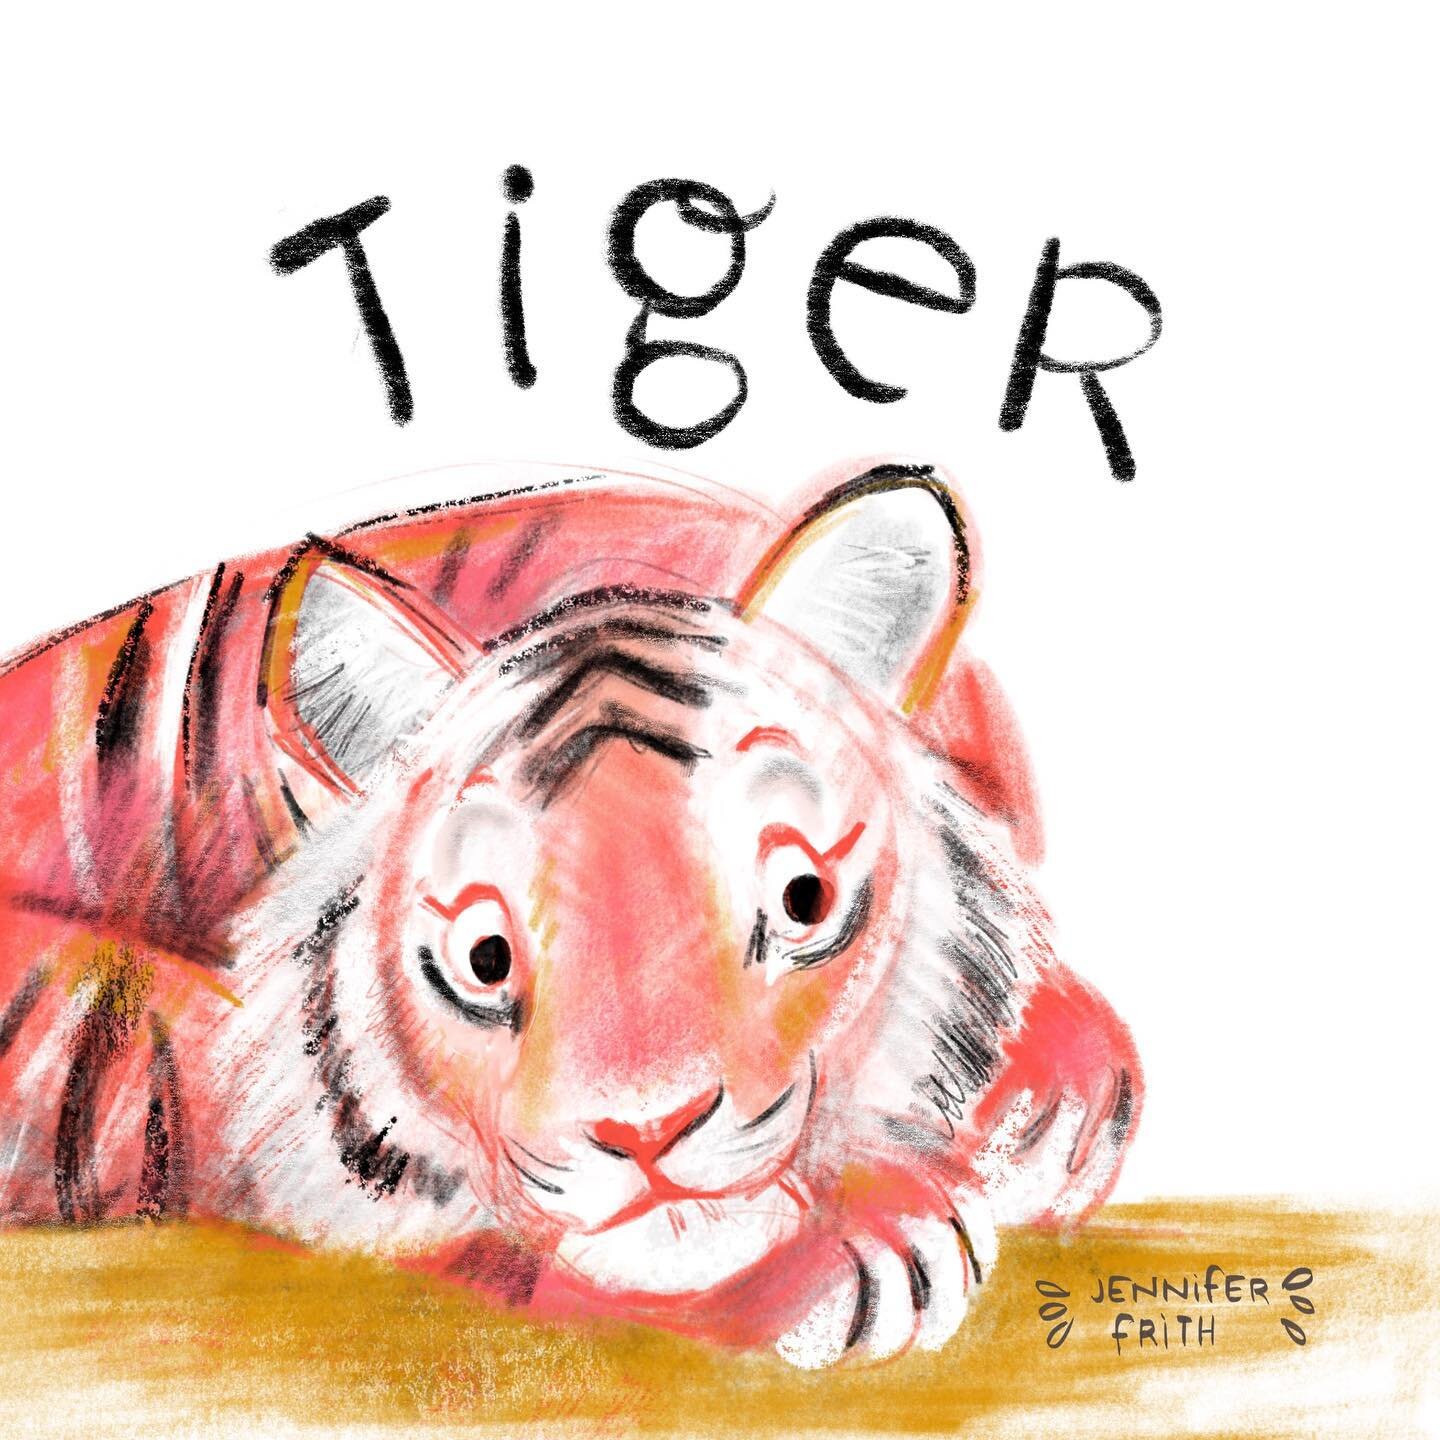 Drawing an animal a day. 13/30 tigers! 🐅 #acritteraday